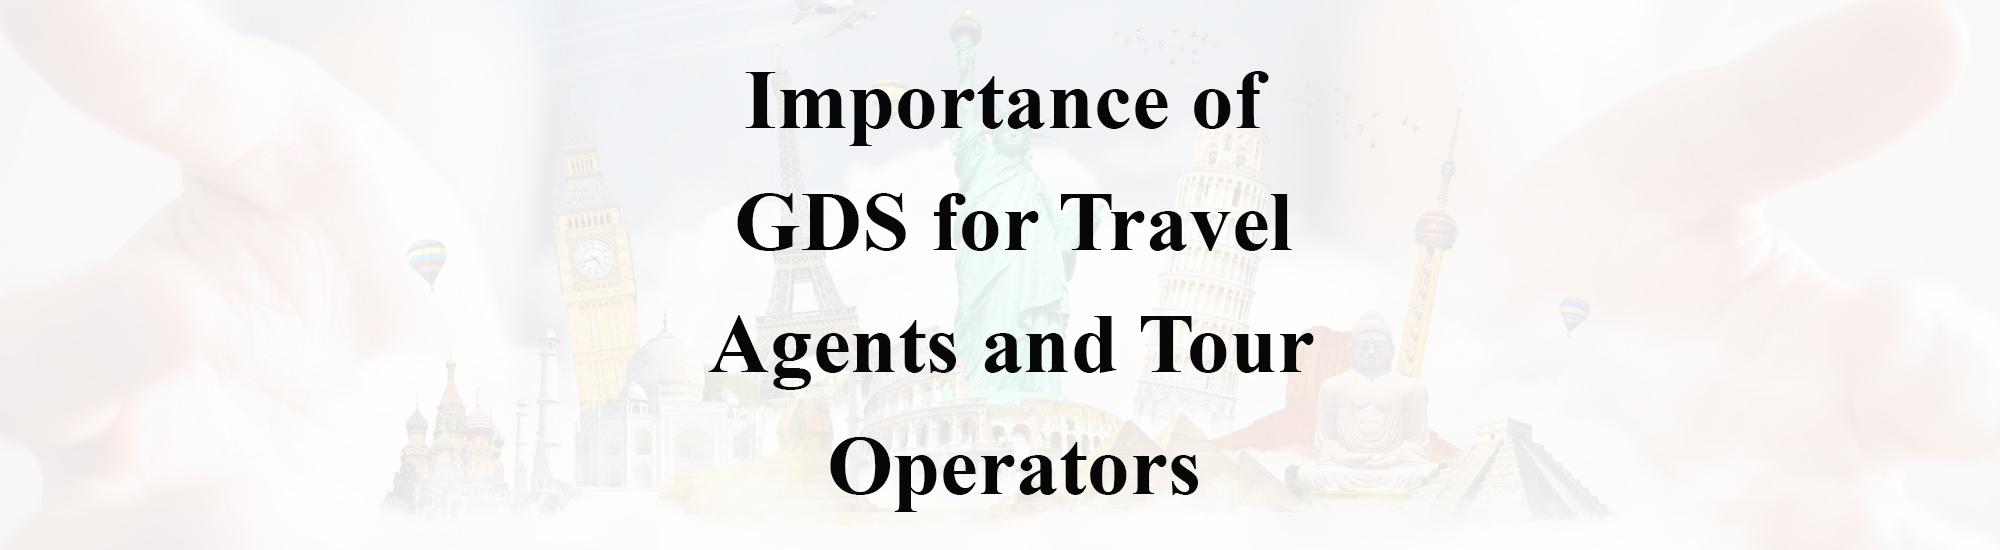 GDS for travel agents and tour operators